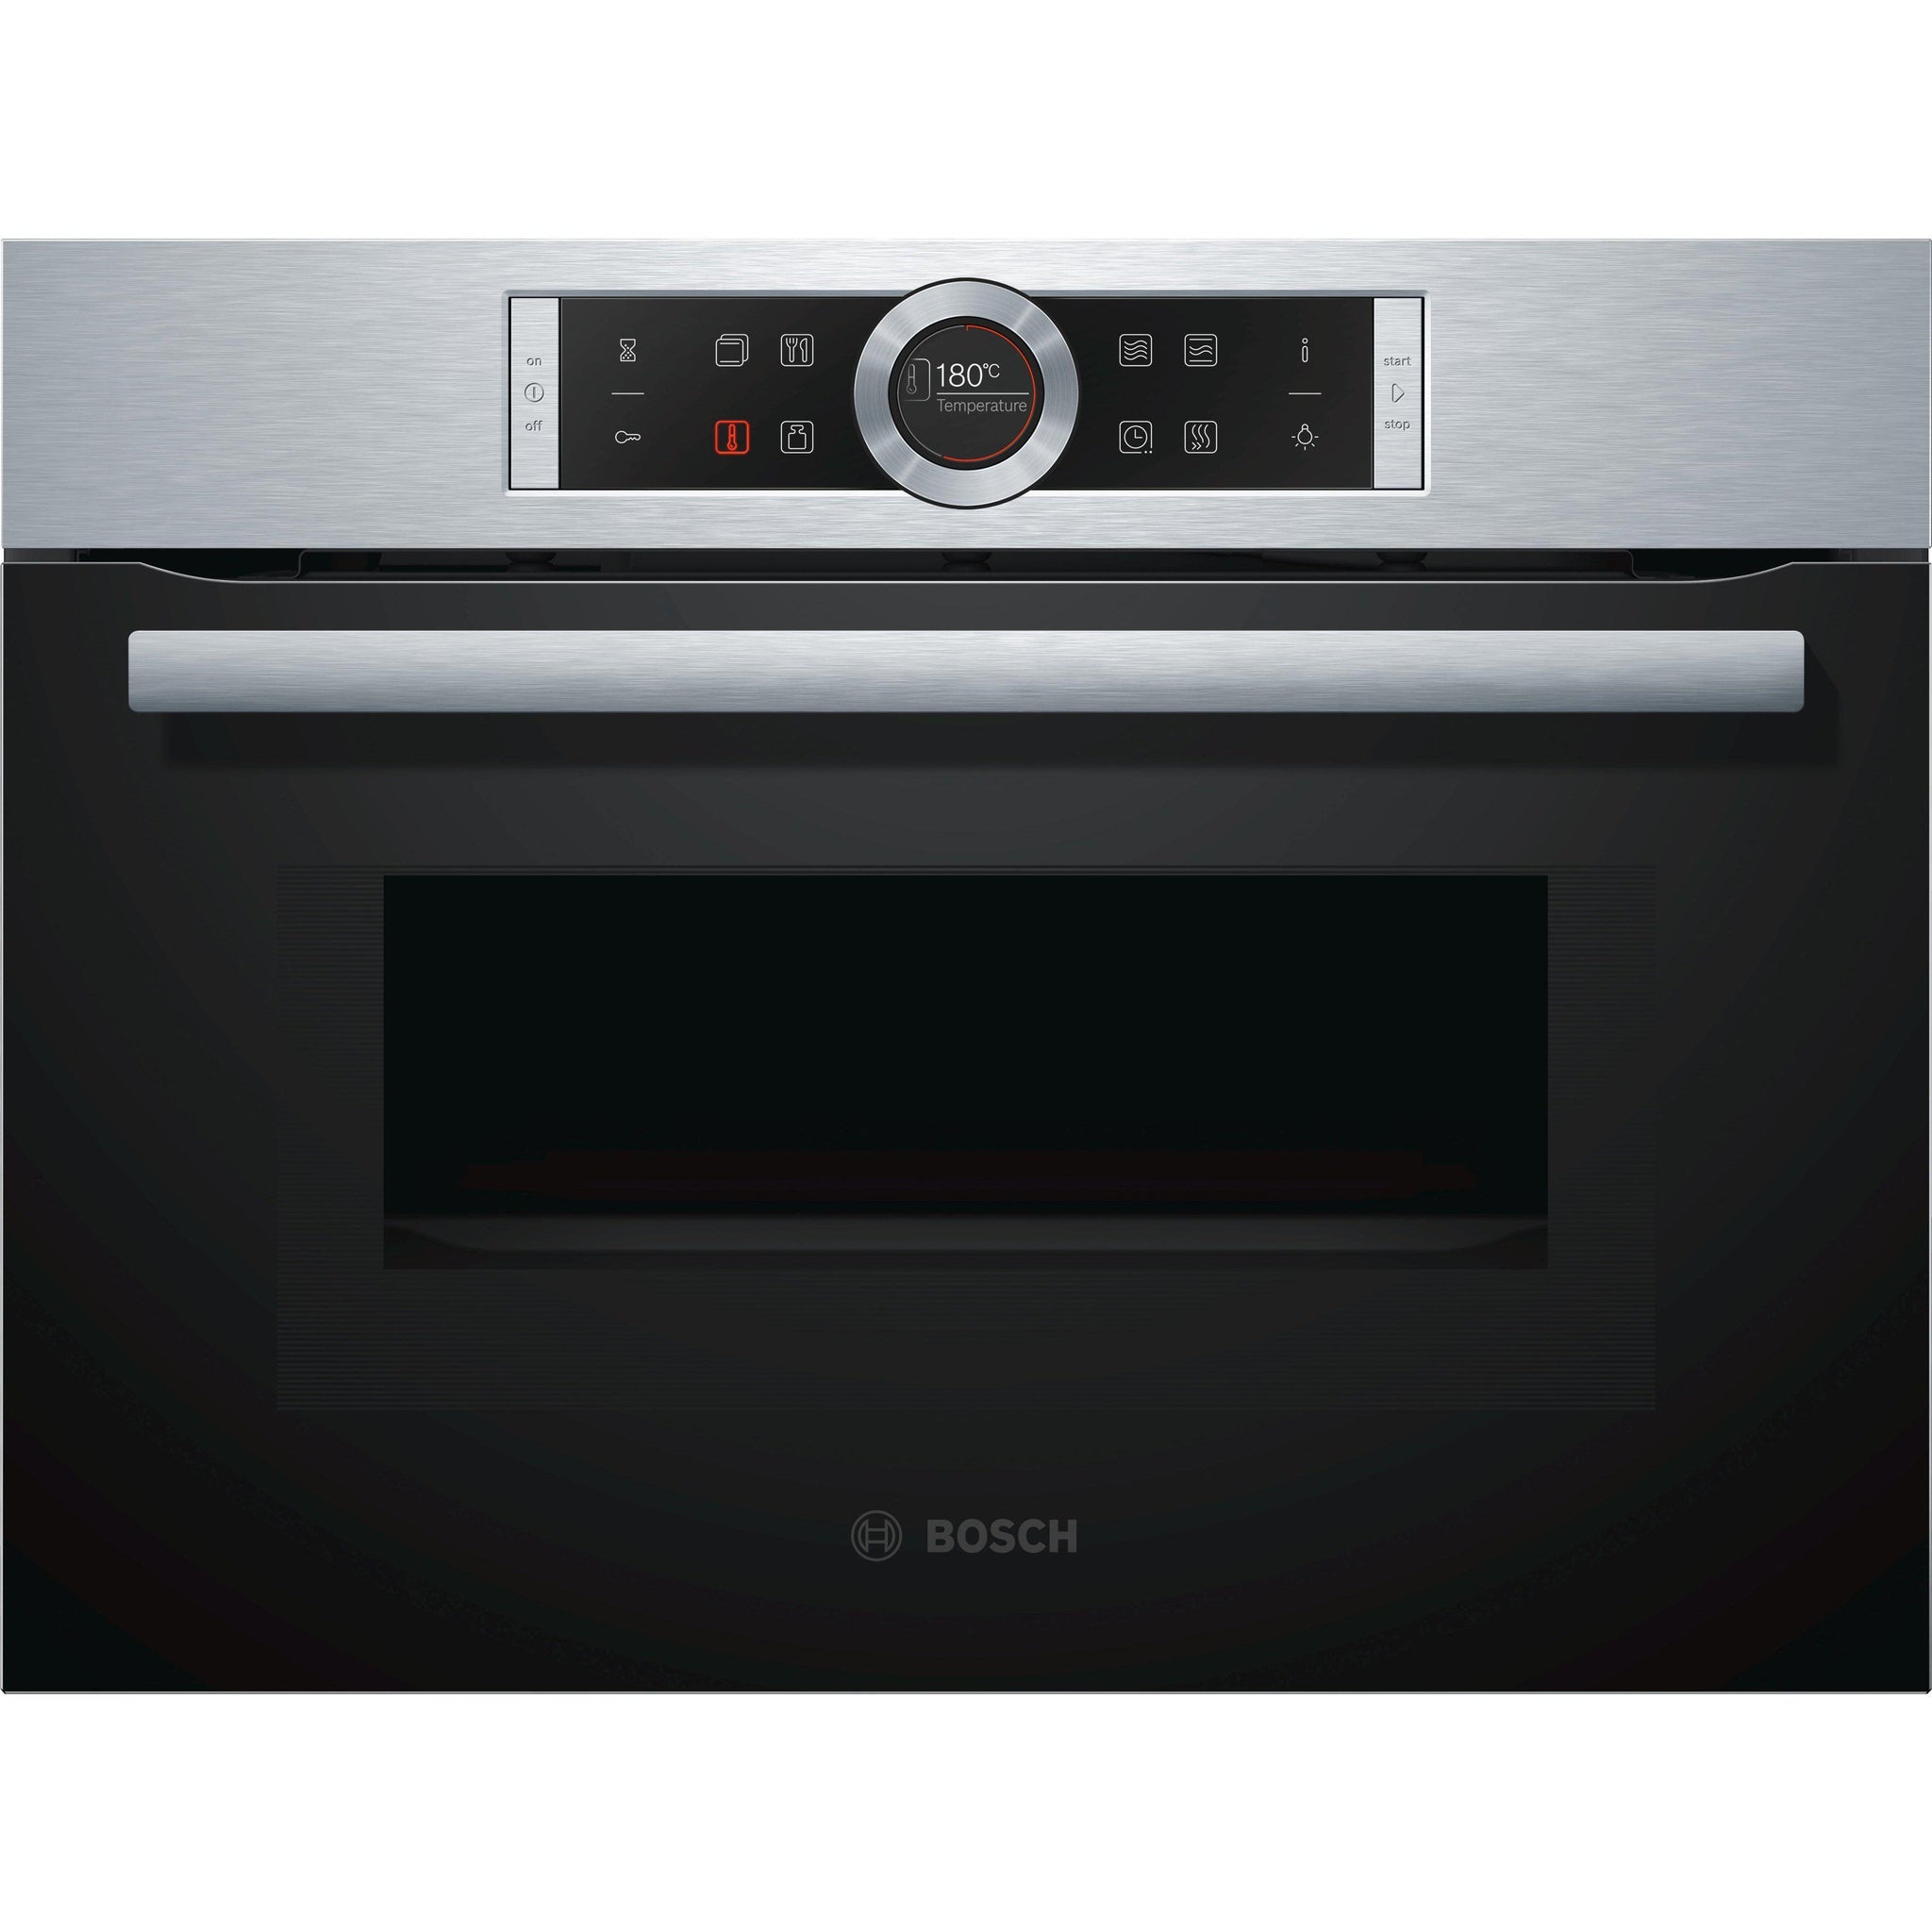 Bosch Series 8 Cmg633bs1b Builtin Combination Oven Stainless Steel 2 Only At This Price